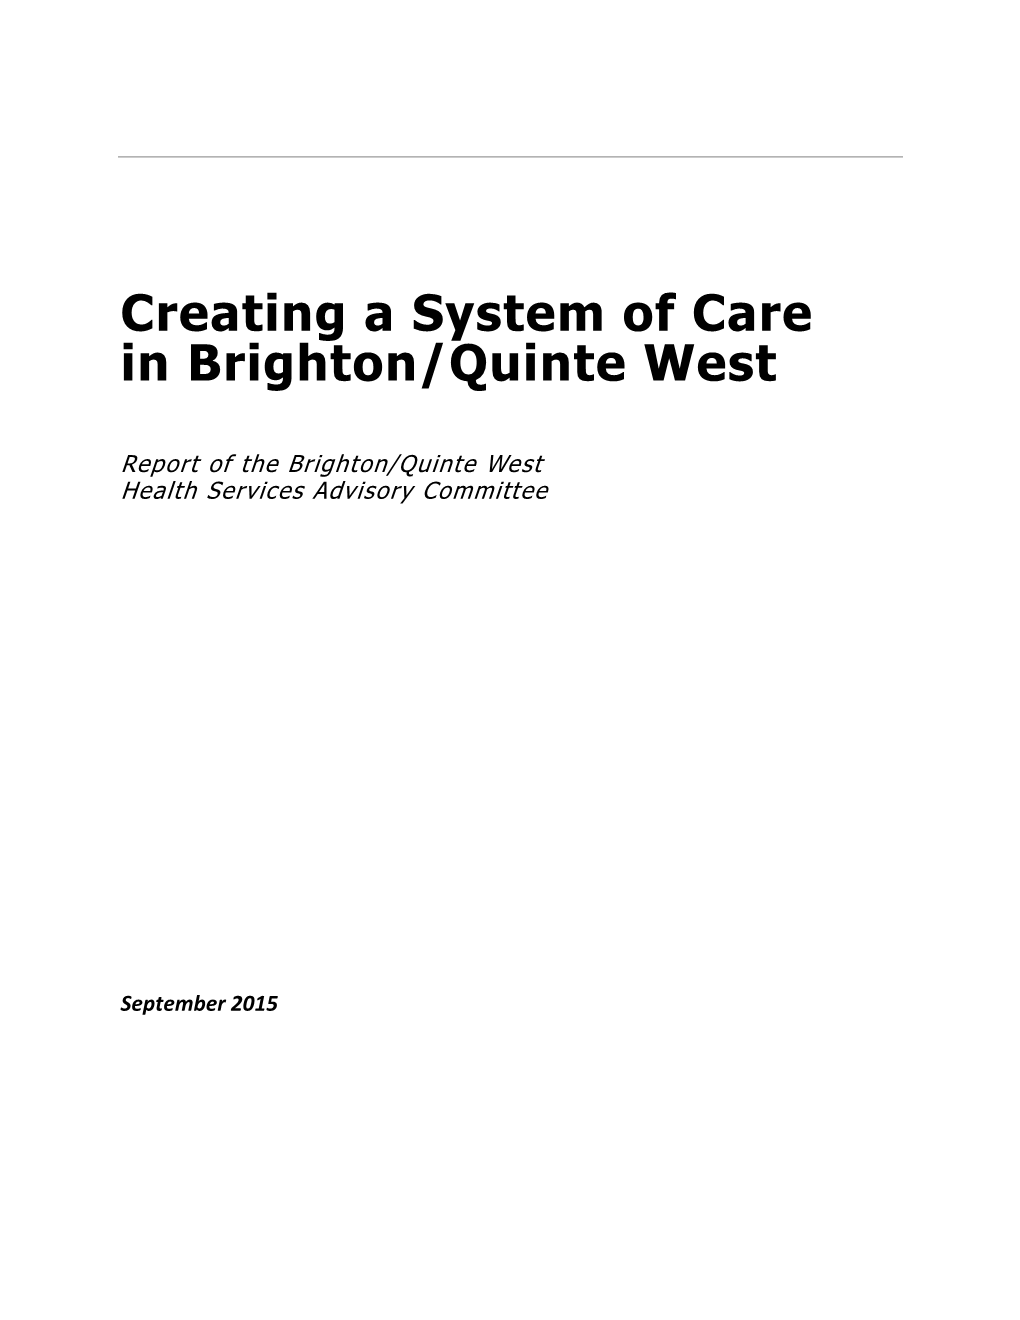 Creating a System of Care in Brighton/Quinte West